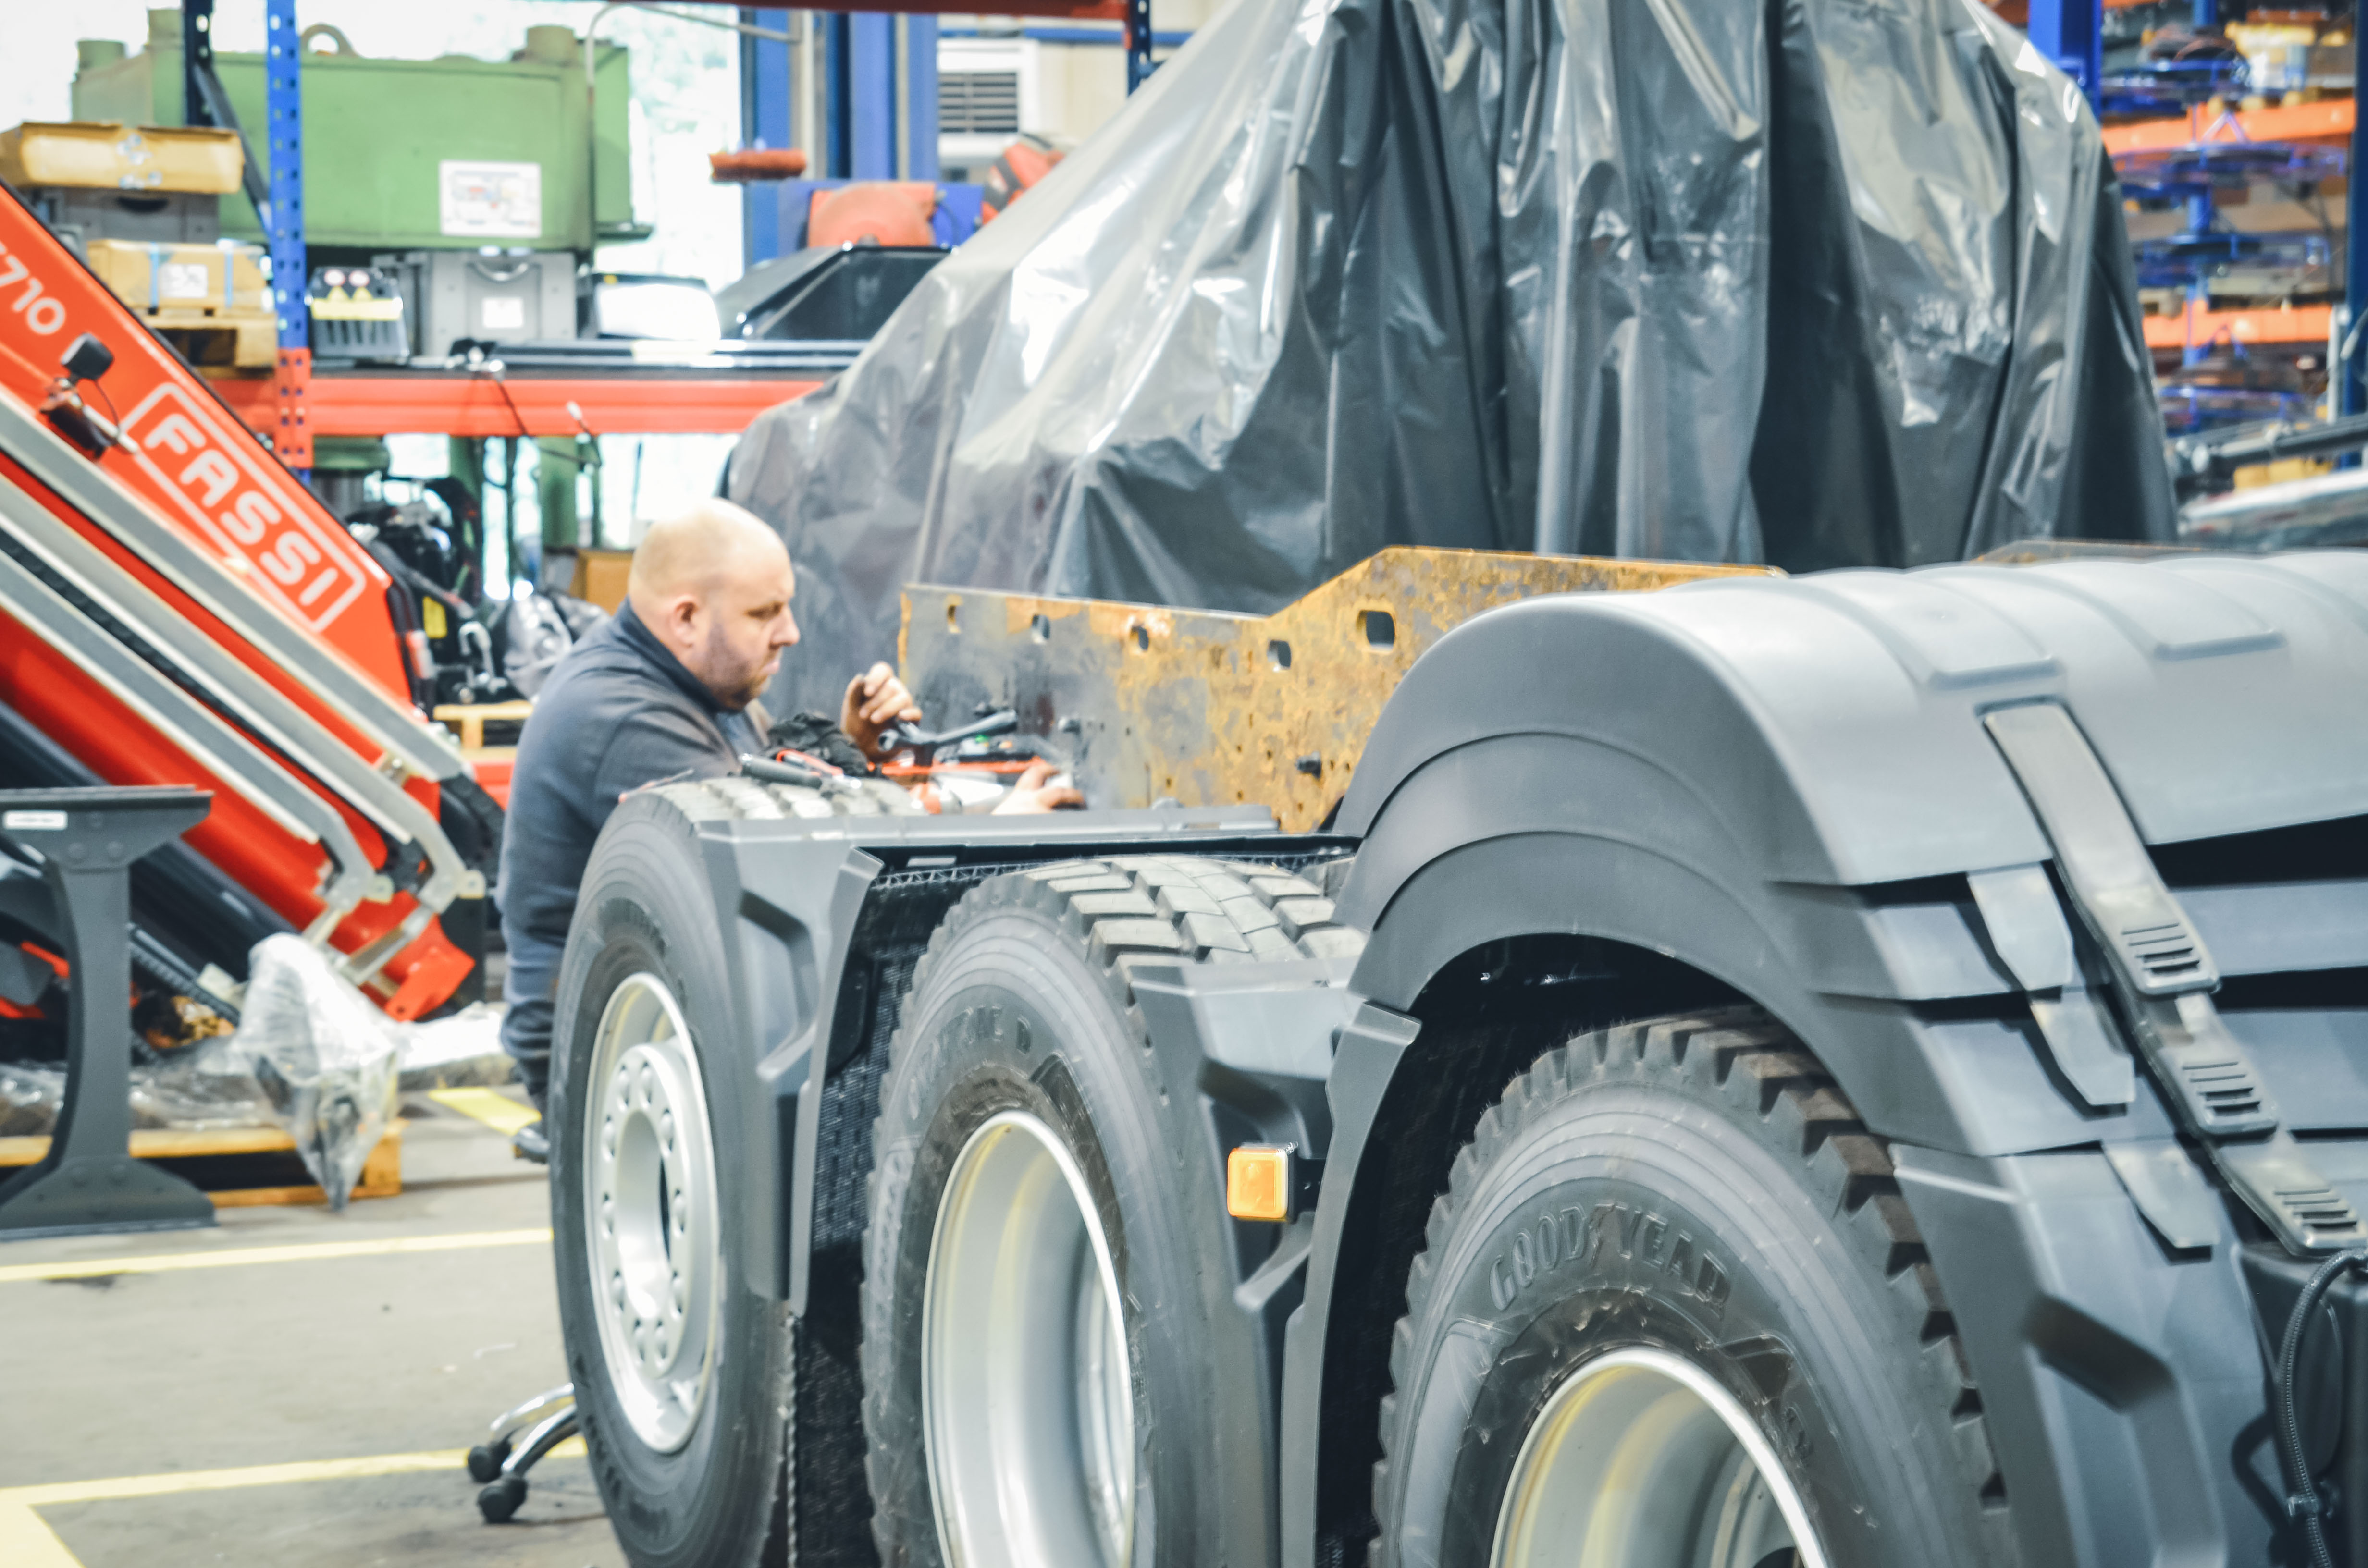 Workshop employee carrying out bodywork on a truck